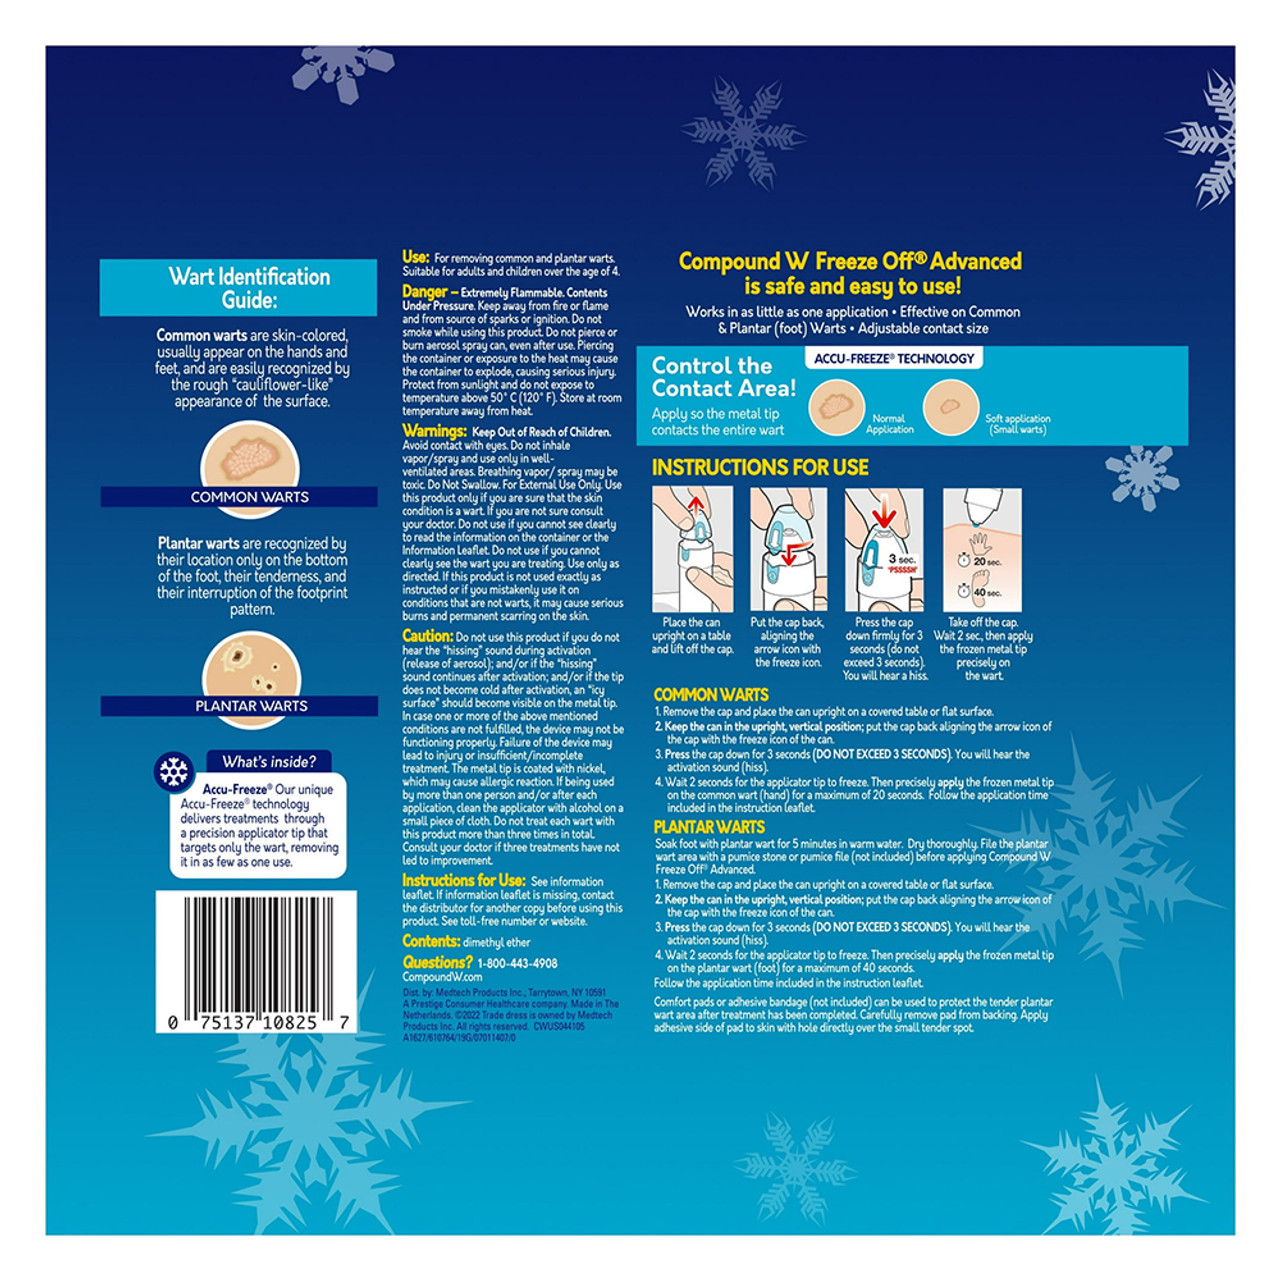 Compound W Wart Removal System Freeze Off Advanced - Shop Skin